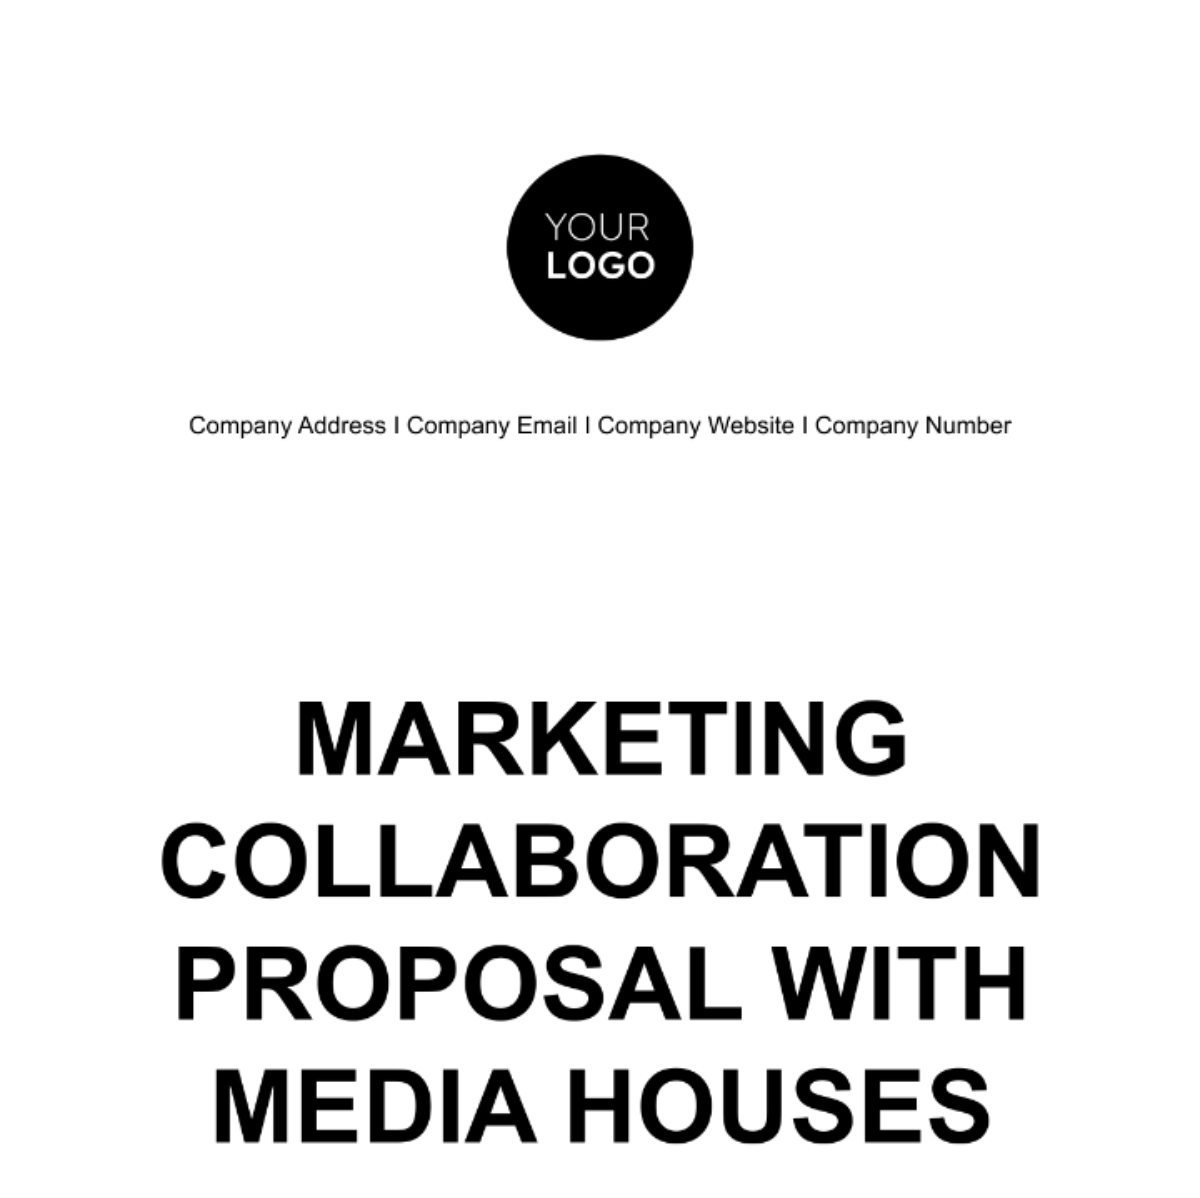 Marketing Collaboration Proposal with Media Houses Template